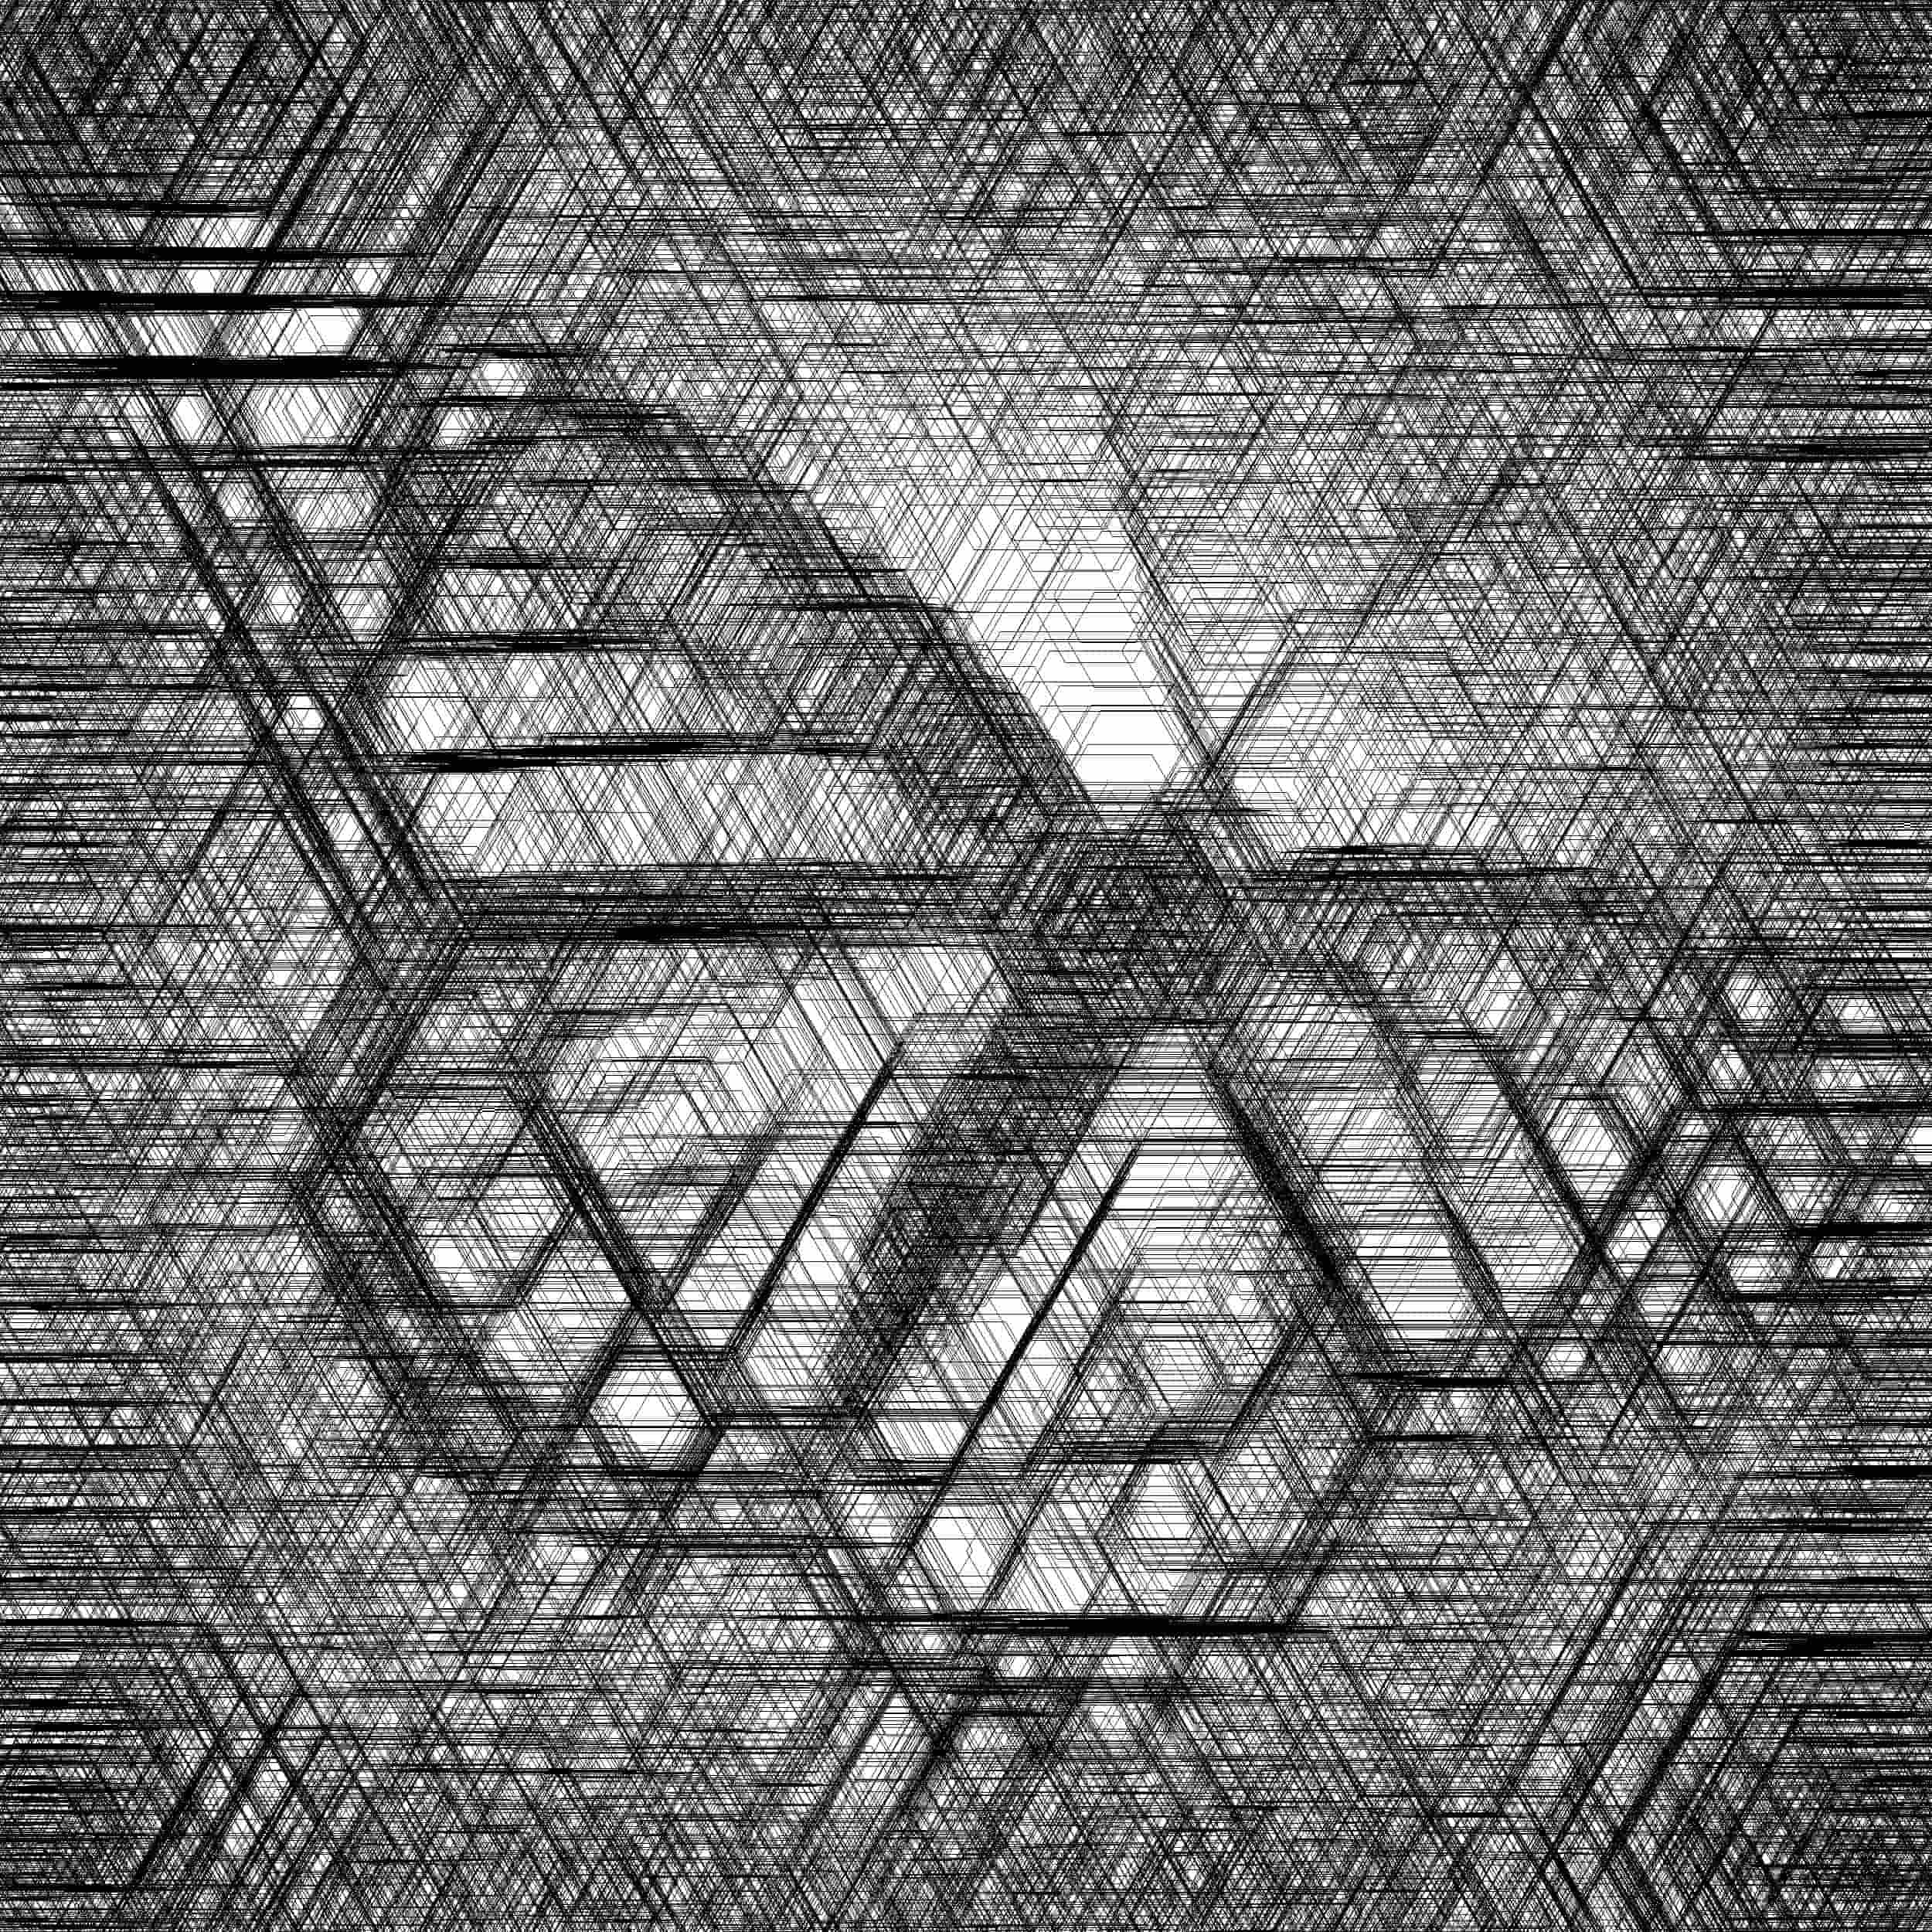 Butterfly, with hexagons